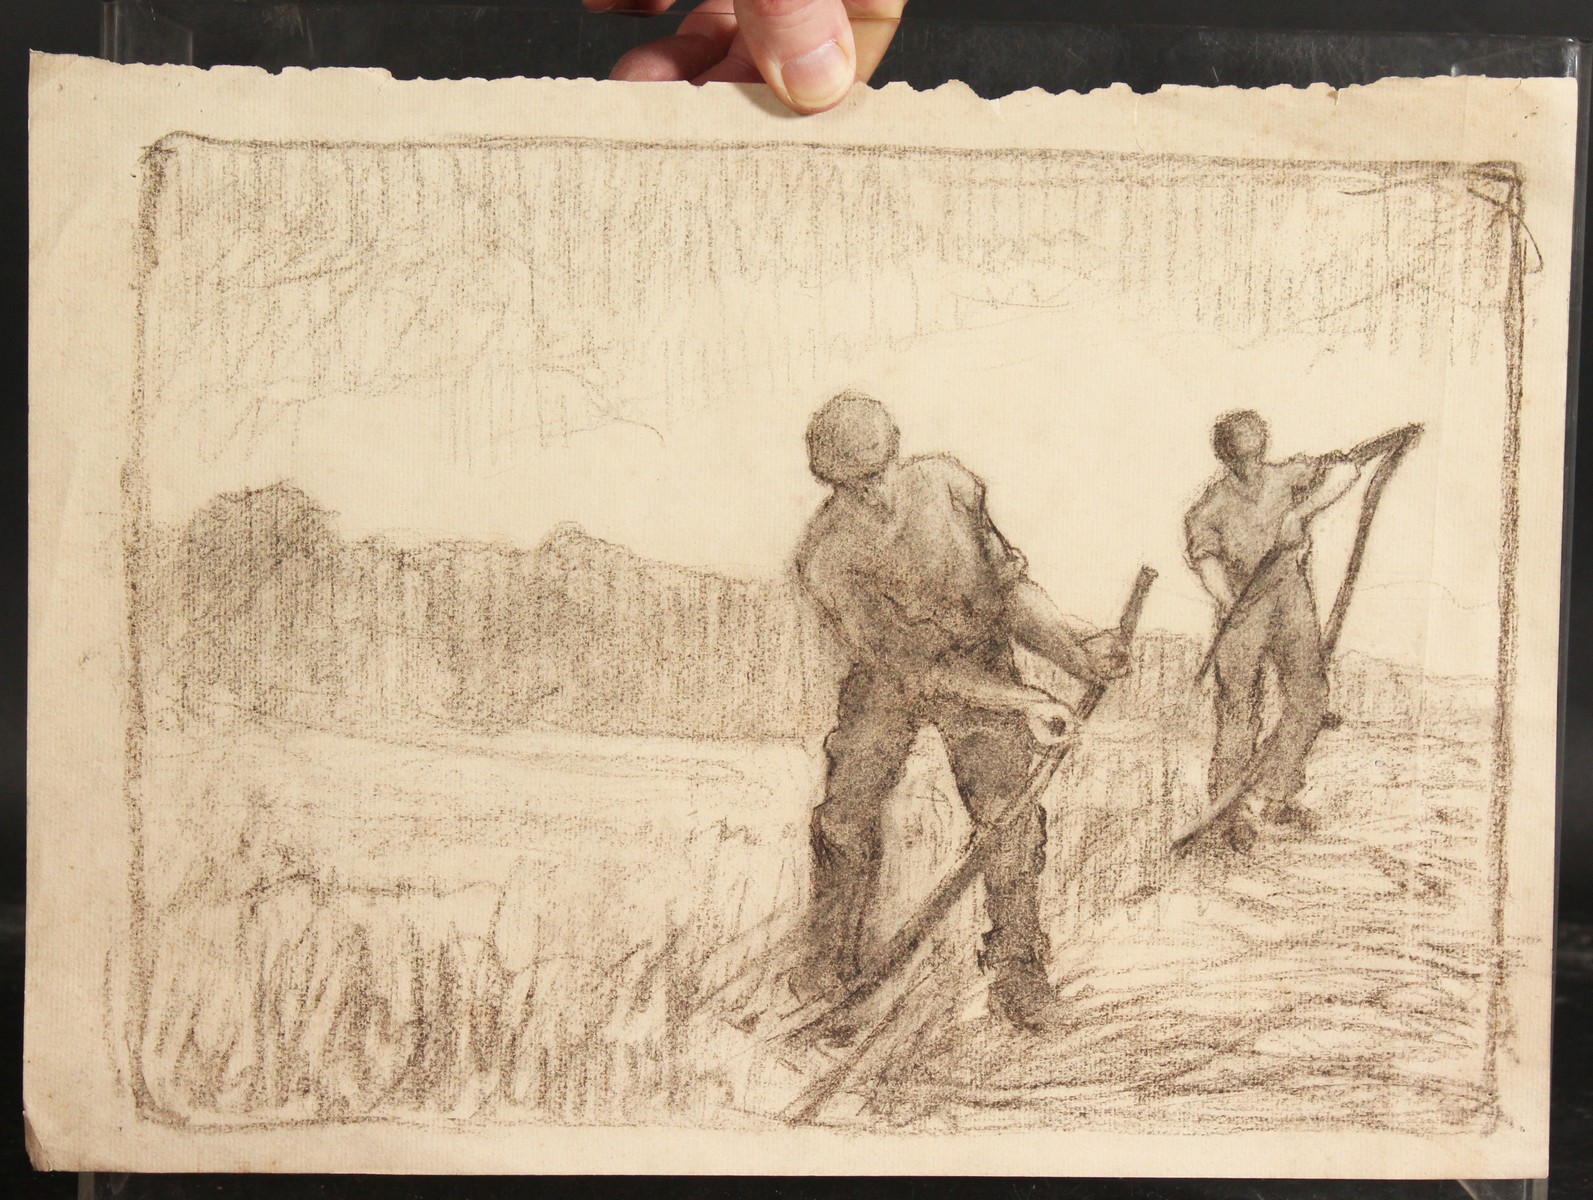 Circle of Harry Becker (1865-1928) British. Study of Figures Scything in a Field, Charcoal and - Image 2 of 3